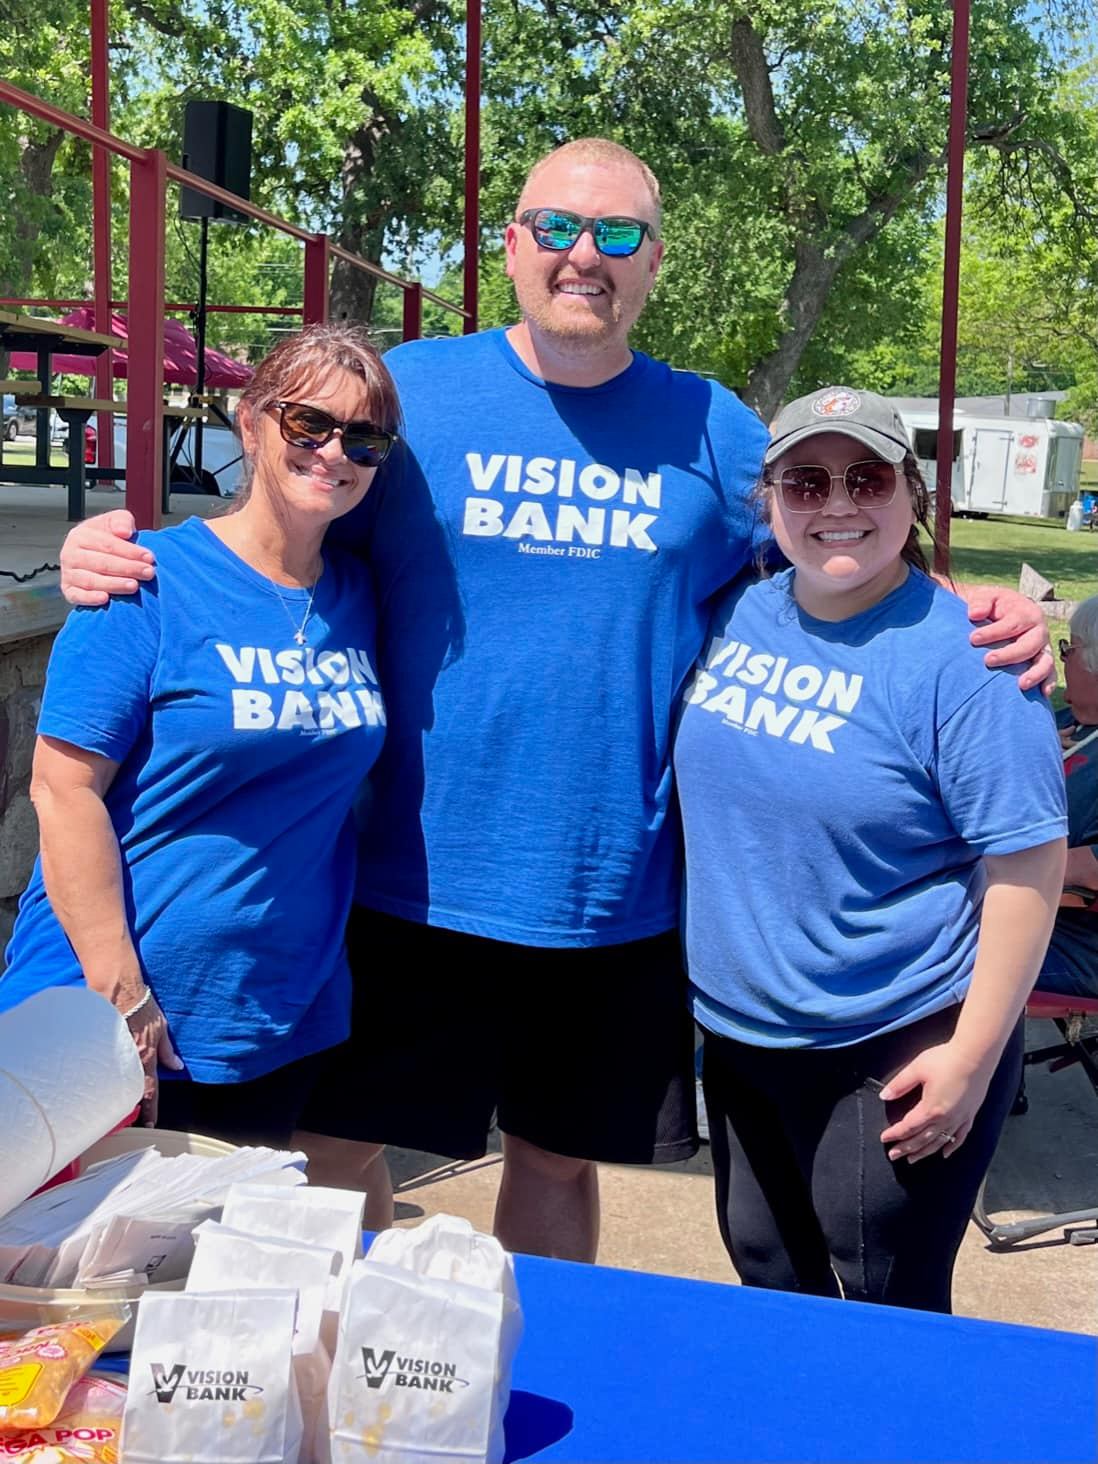 Vision Bank employees volunteering at community event. 